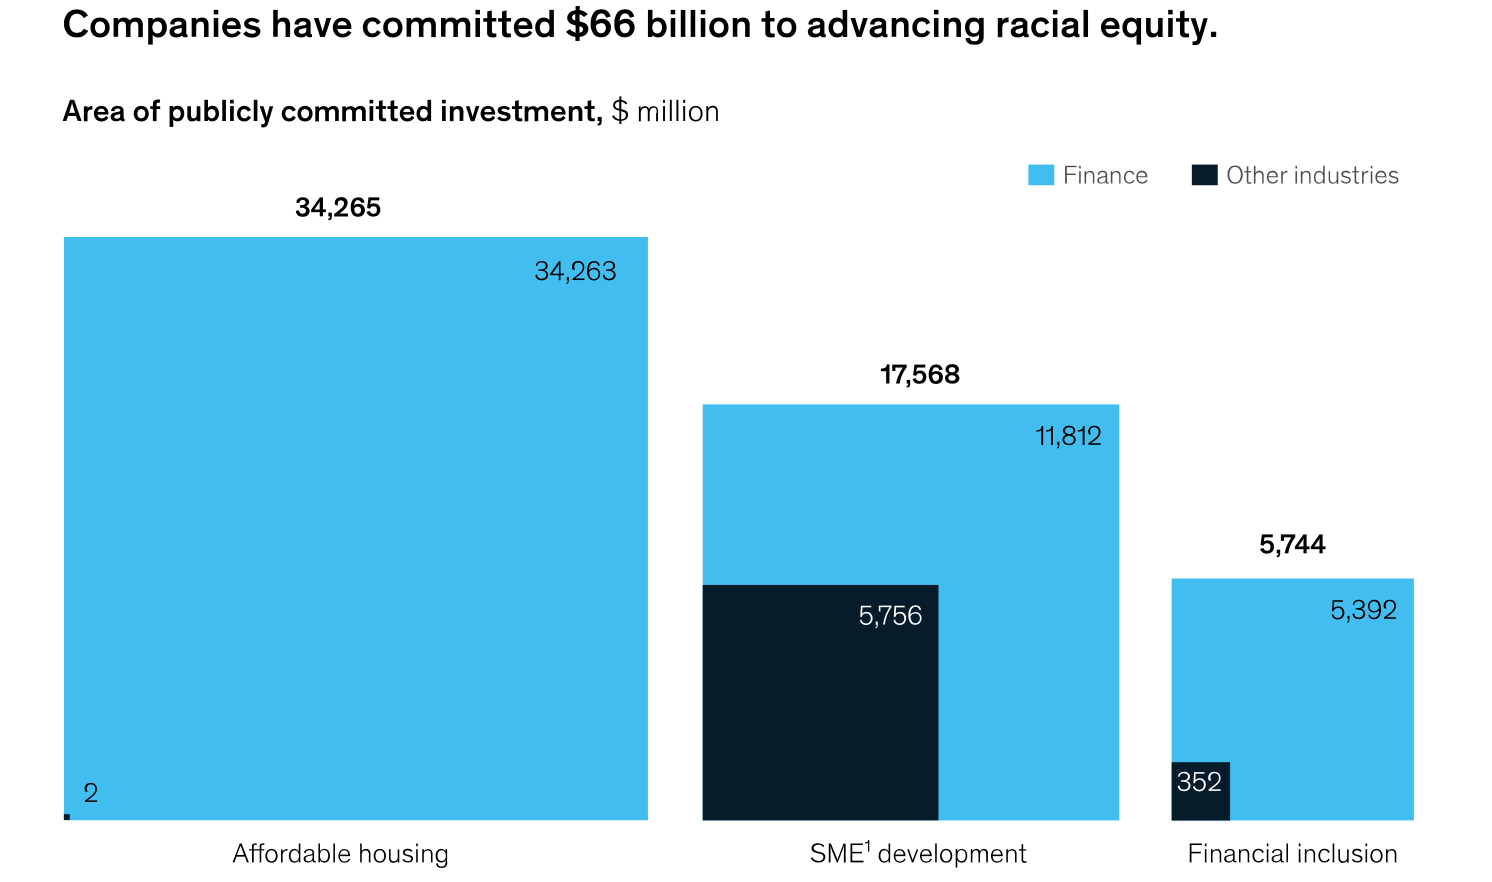 $66 Billion Committed to Racial Equality